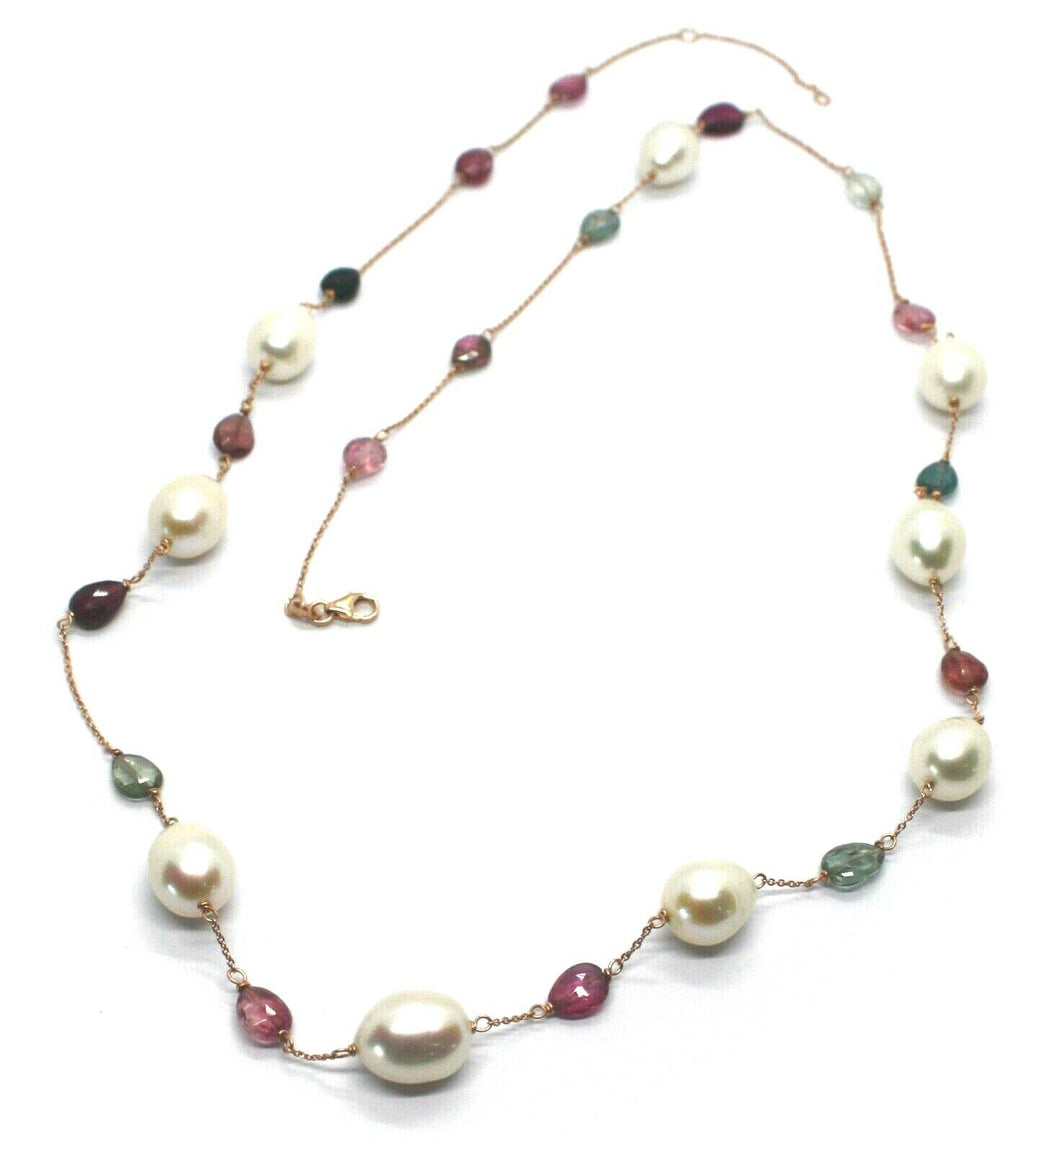 18k rose gold long necklace rolo chain, big 12mm pearls & tourmaline drops 26.7